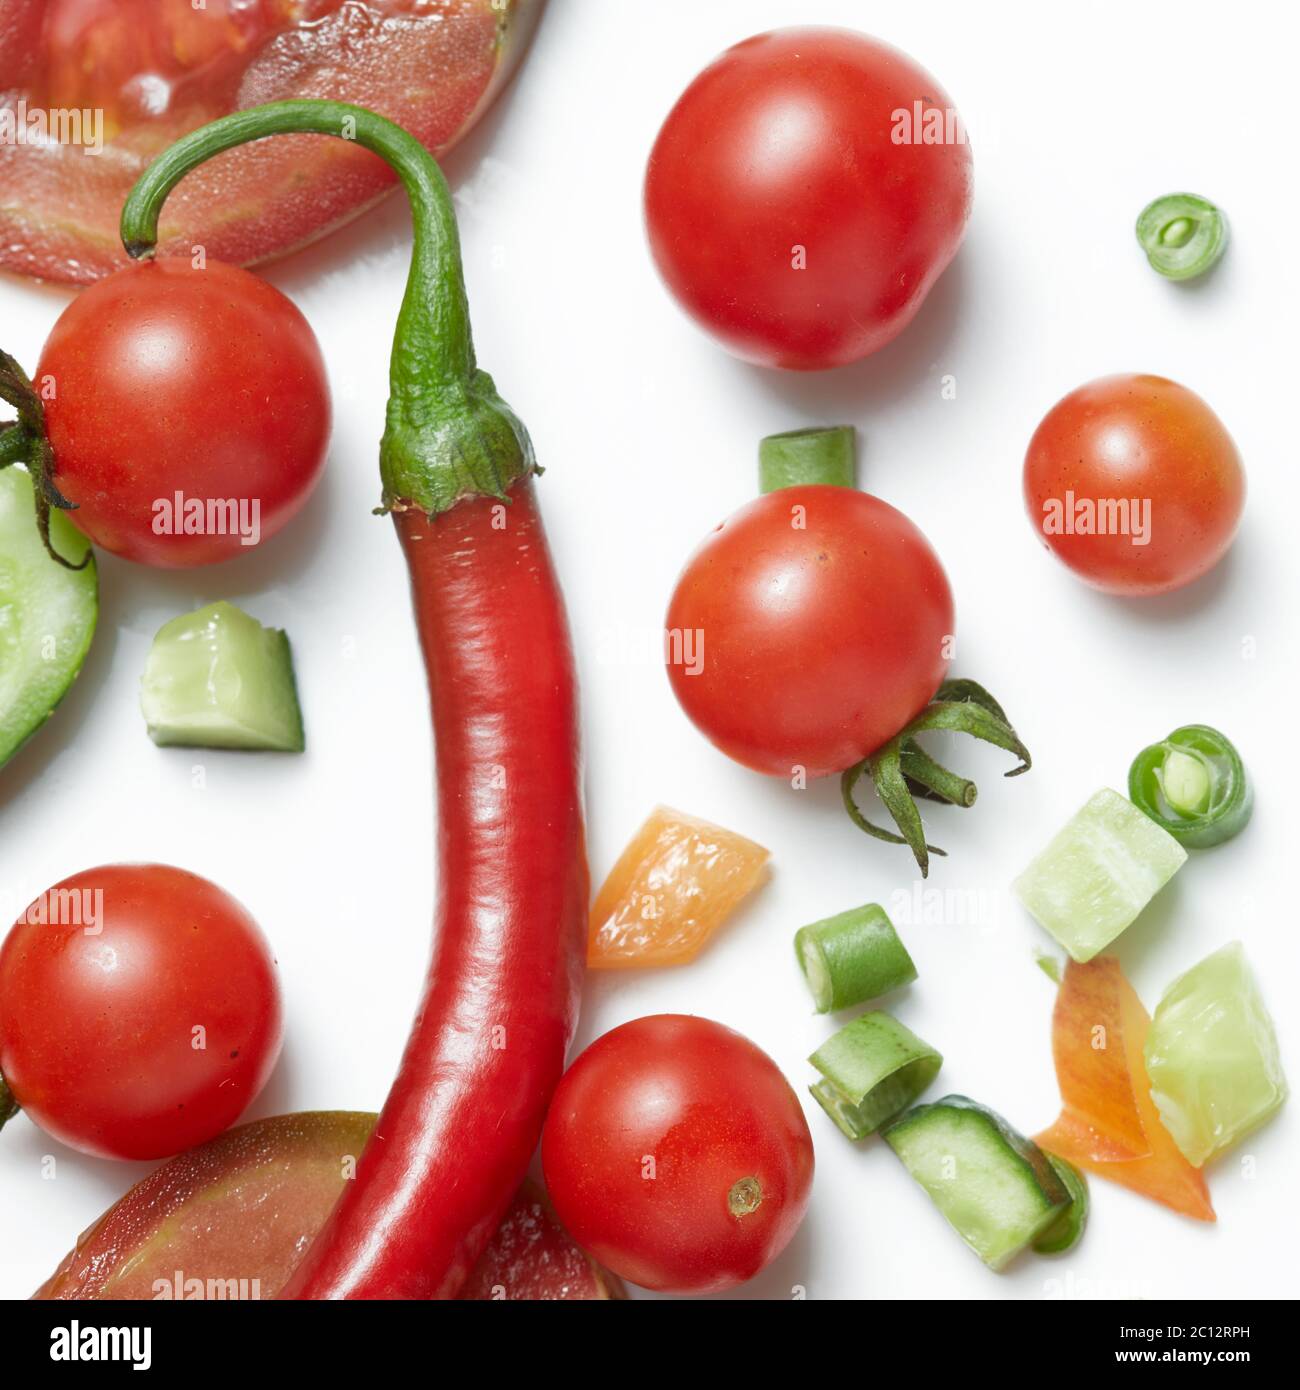 Tomato and red hot chili peppers Stock Photo